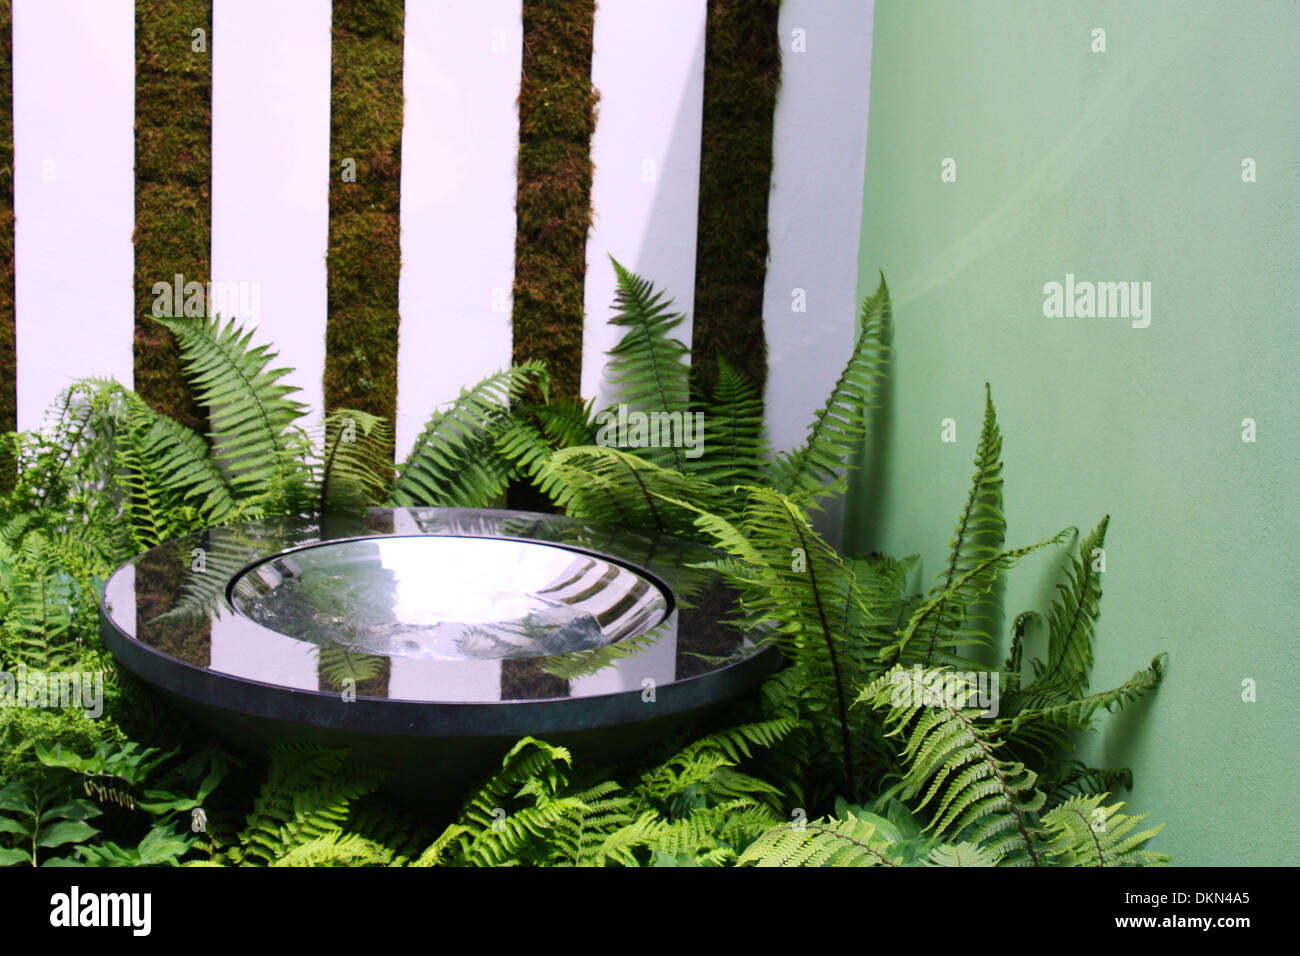 Water bowl surrounded by green fern plants Stock Photo